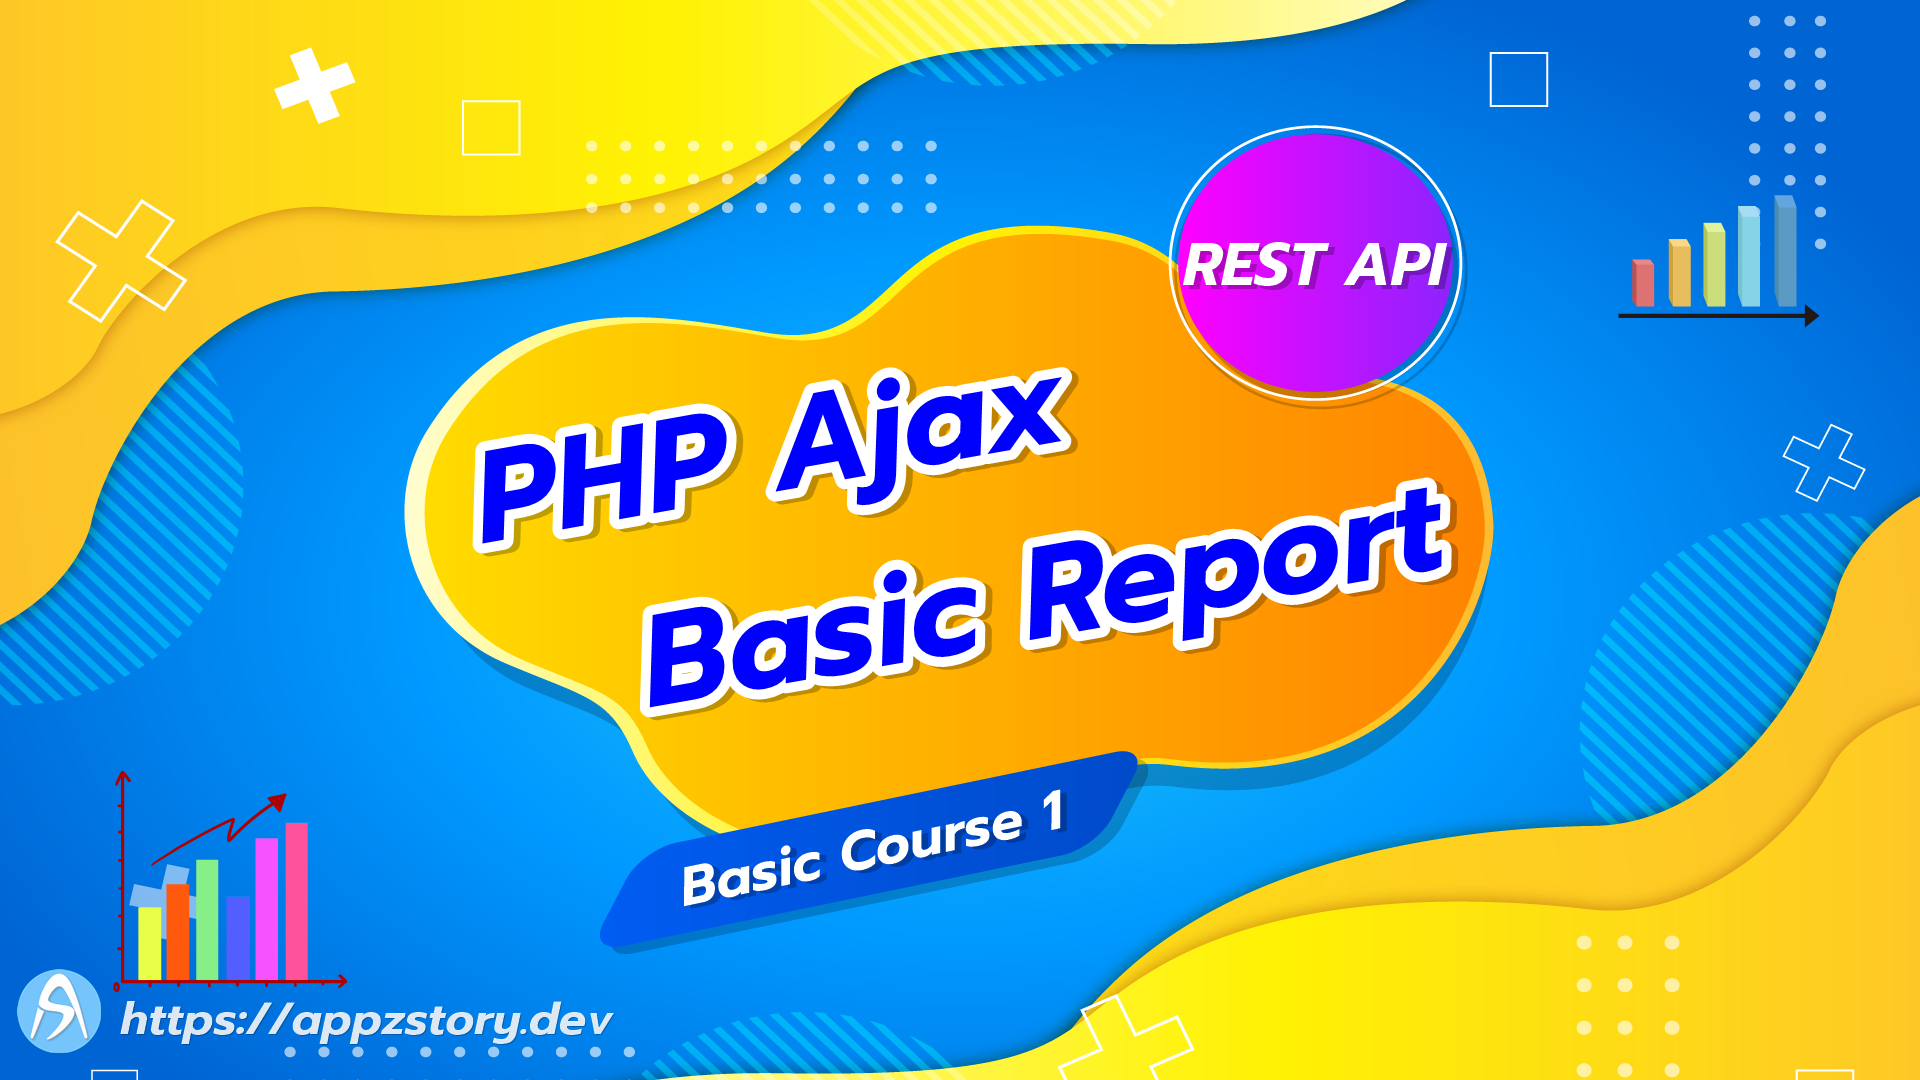 PHP Ajax Basic Report (Basic Course1)